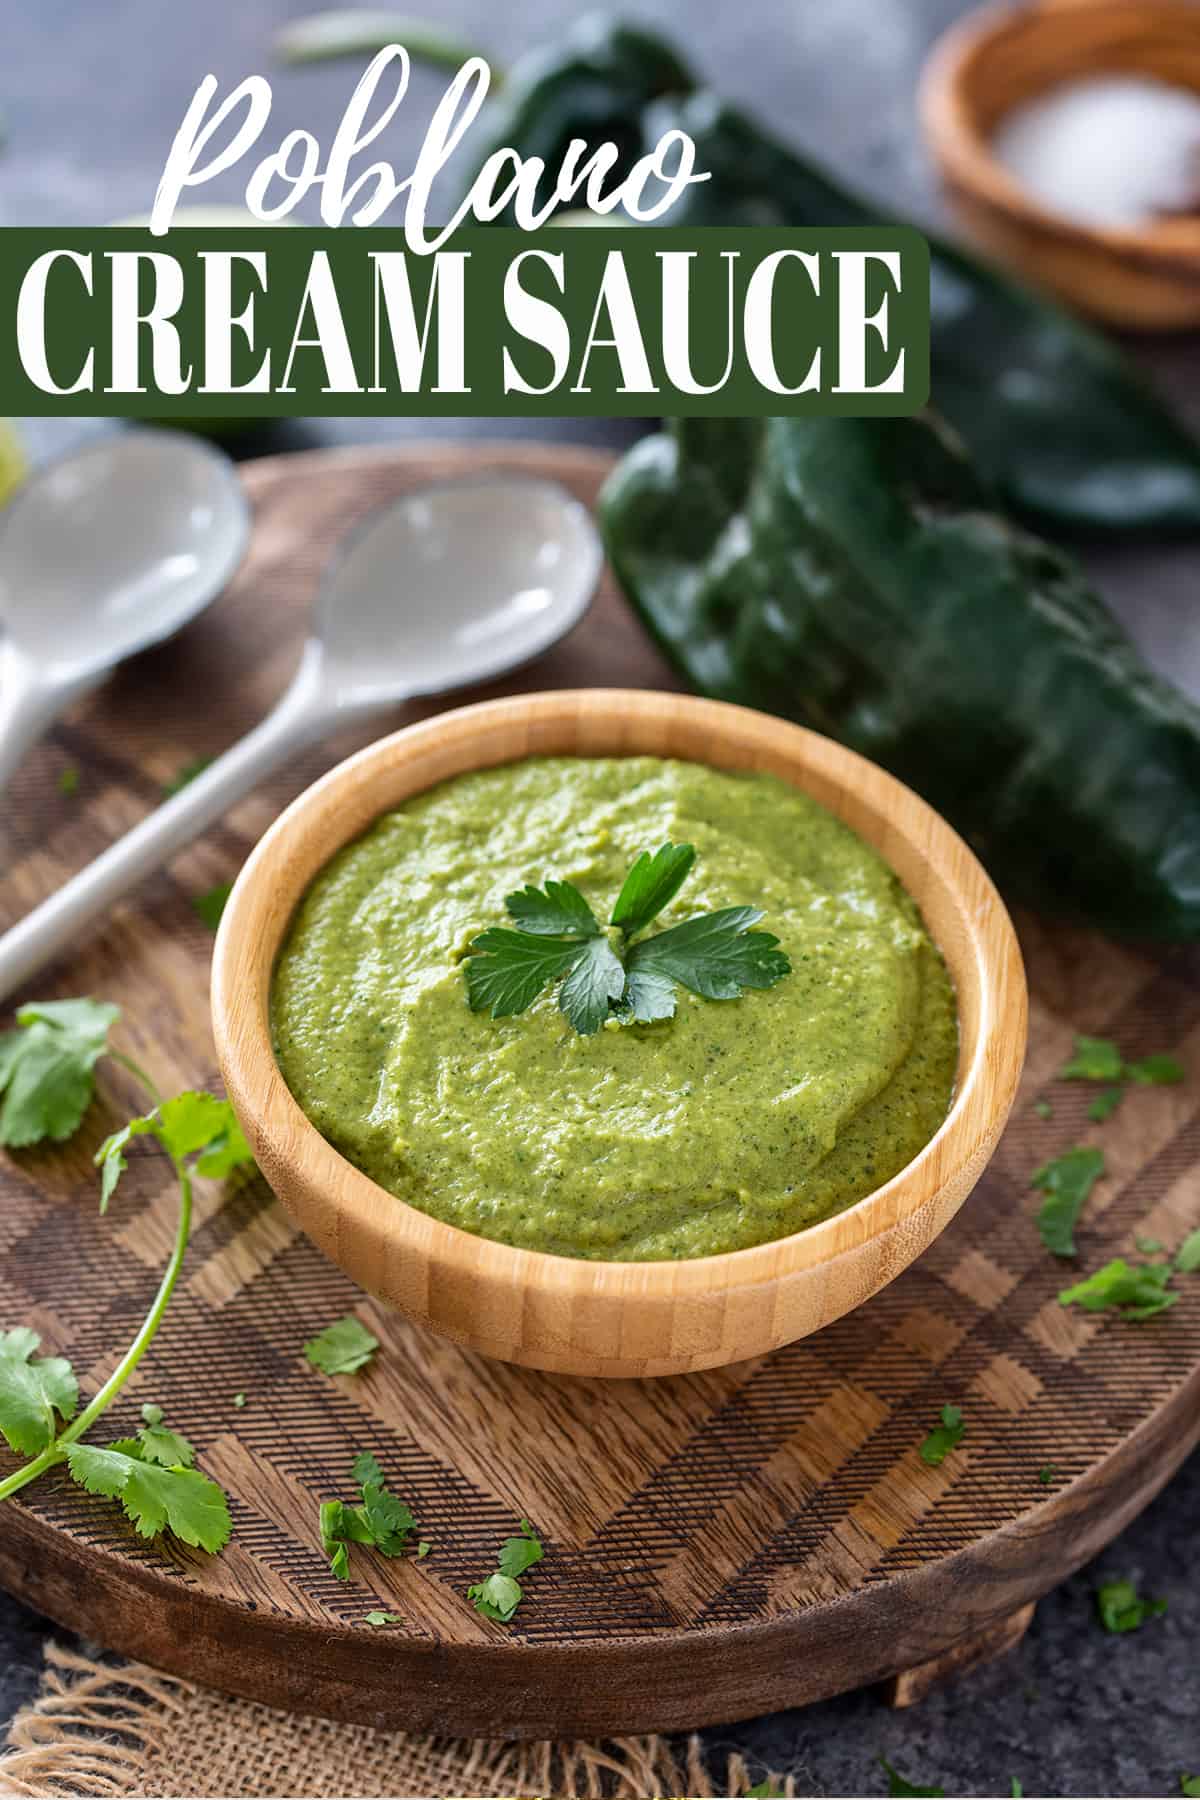 Bowl of green sauce with cilantro on top and peppers in the background on a plaid wood background.